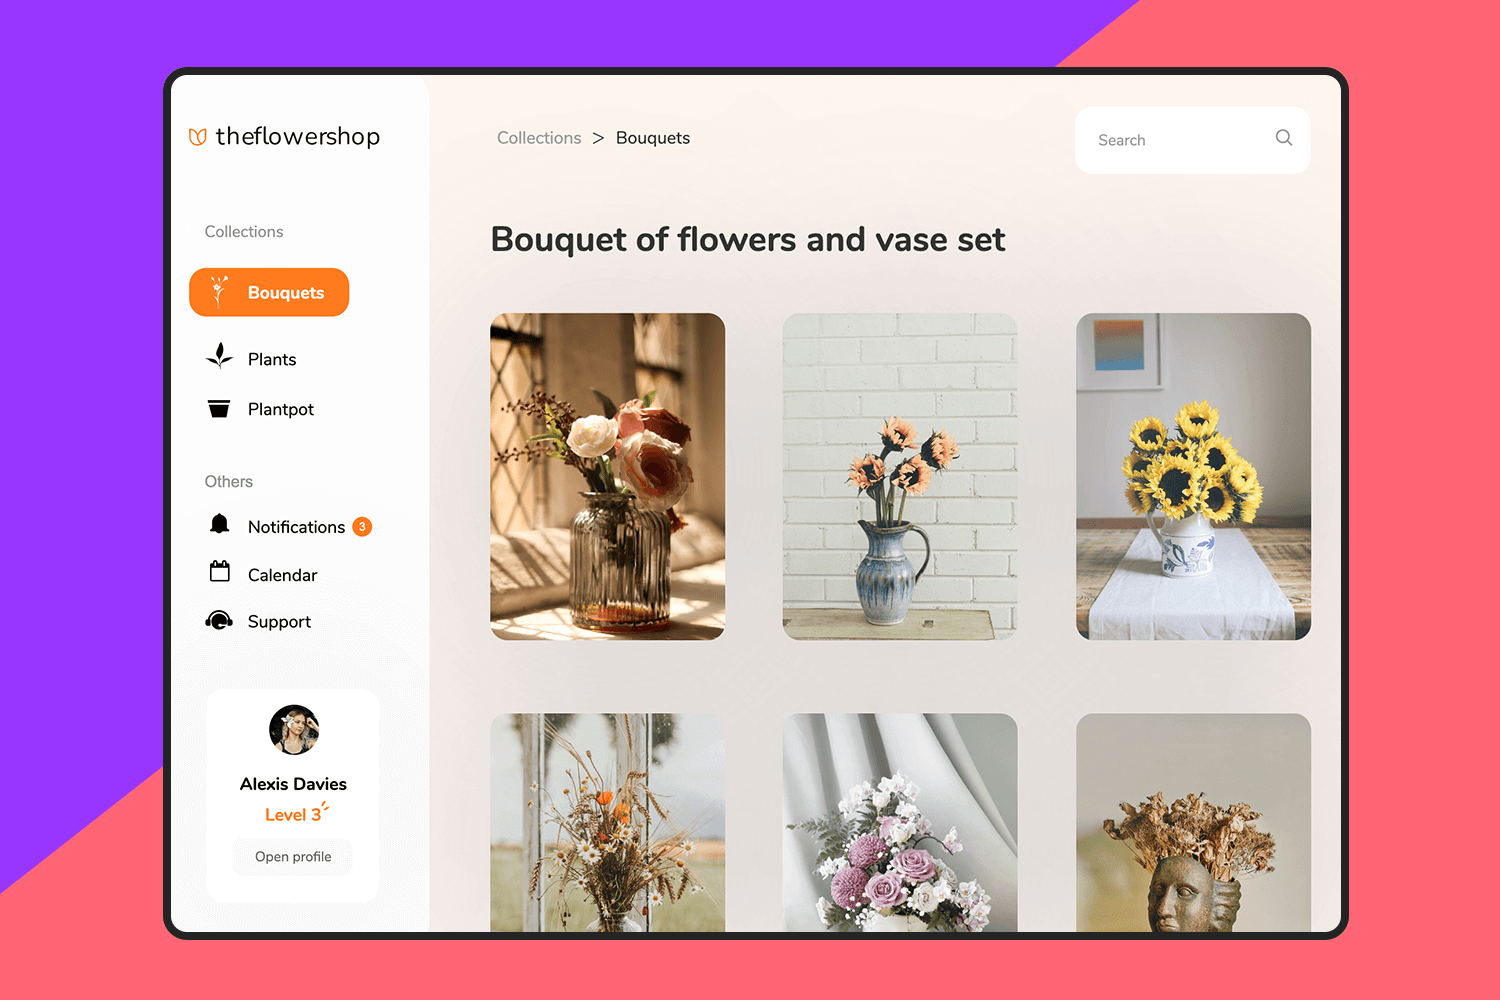 Flower bouquet online store template with collections and user profile